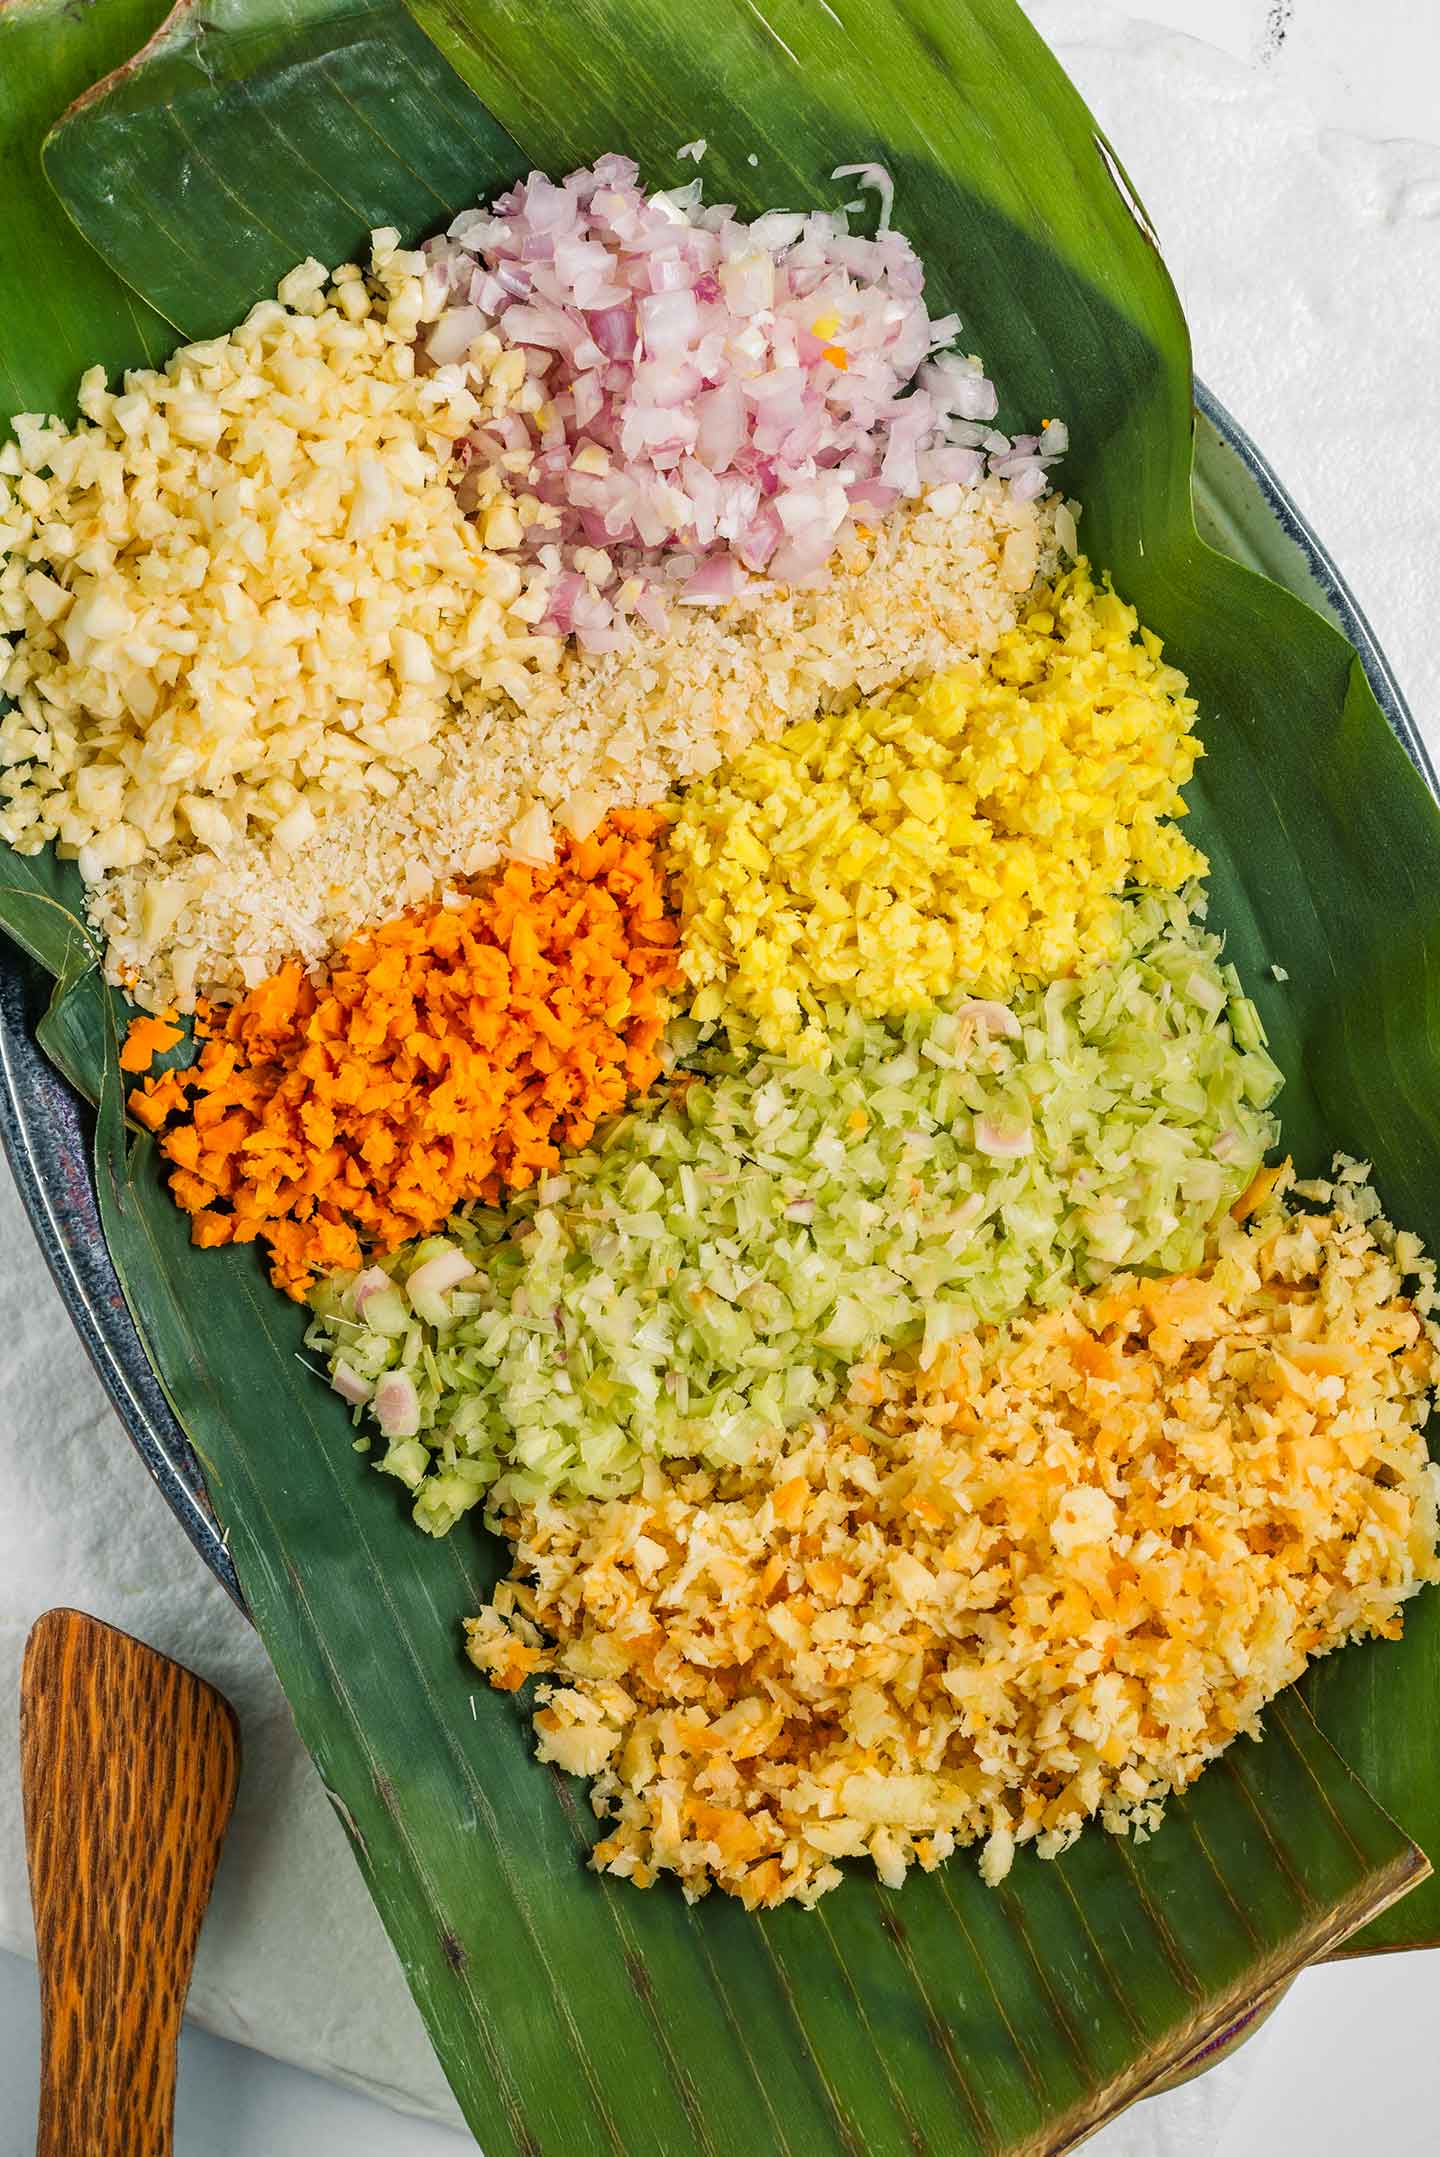 Top down view of the ingredients for basa bali spice paste minced and portioned on a banana leaf.